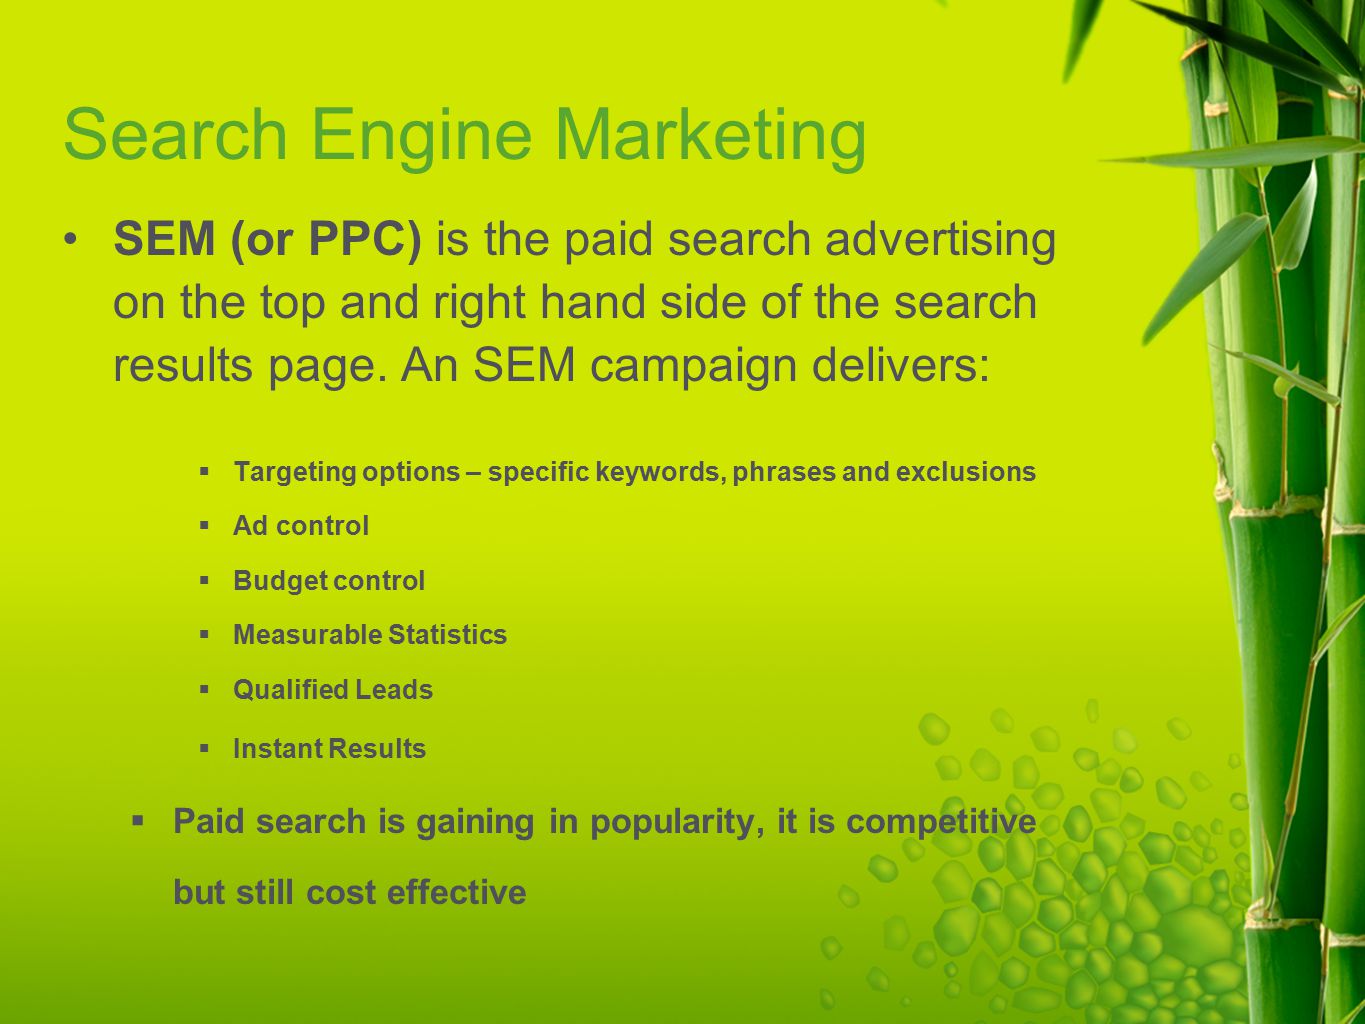 Search Engine Marketing SEM (or PPC) is the paid search advertising on the top and right hand side of the search results page.